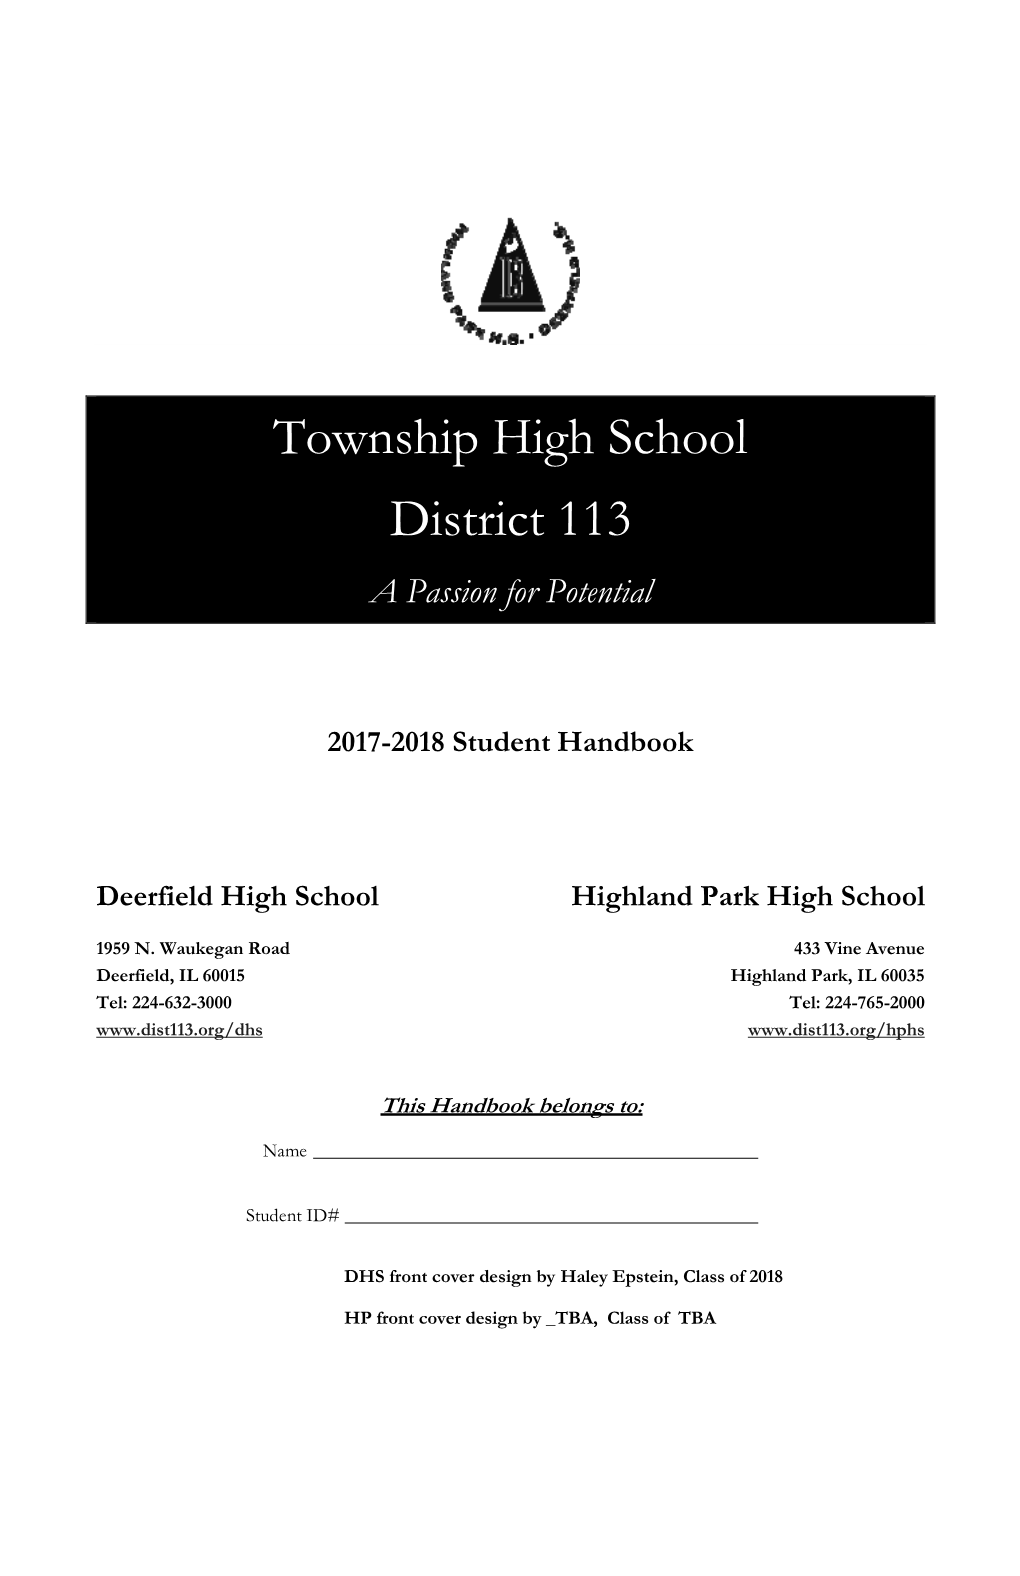 Township High School District 113 a Passion for Potential